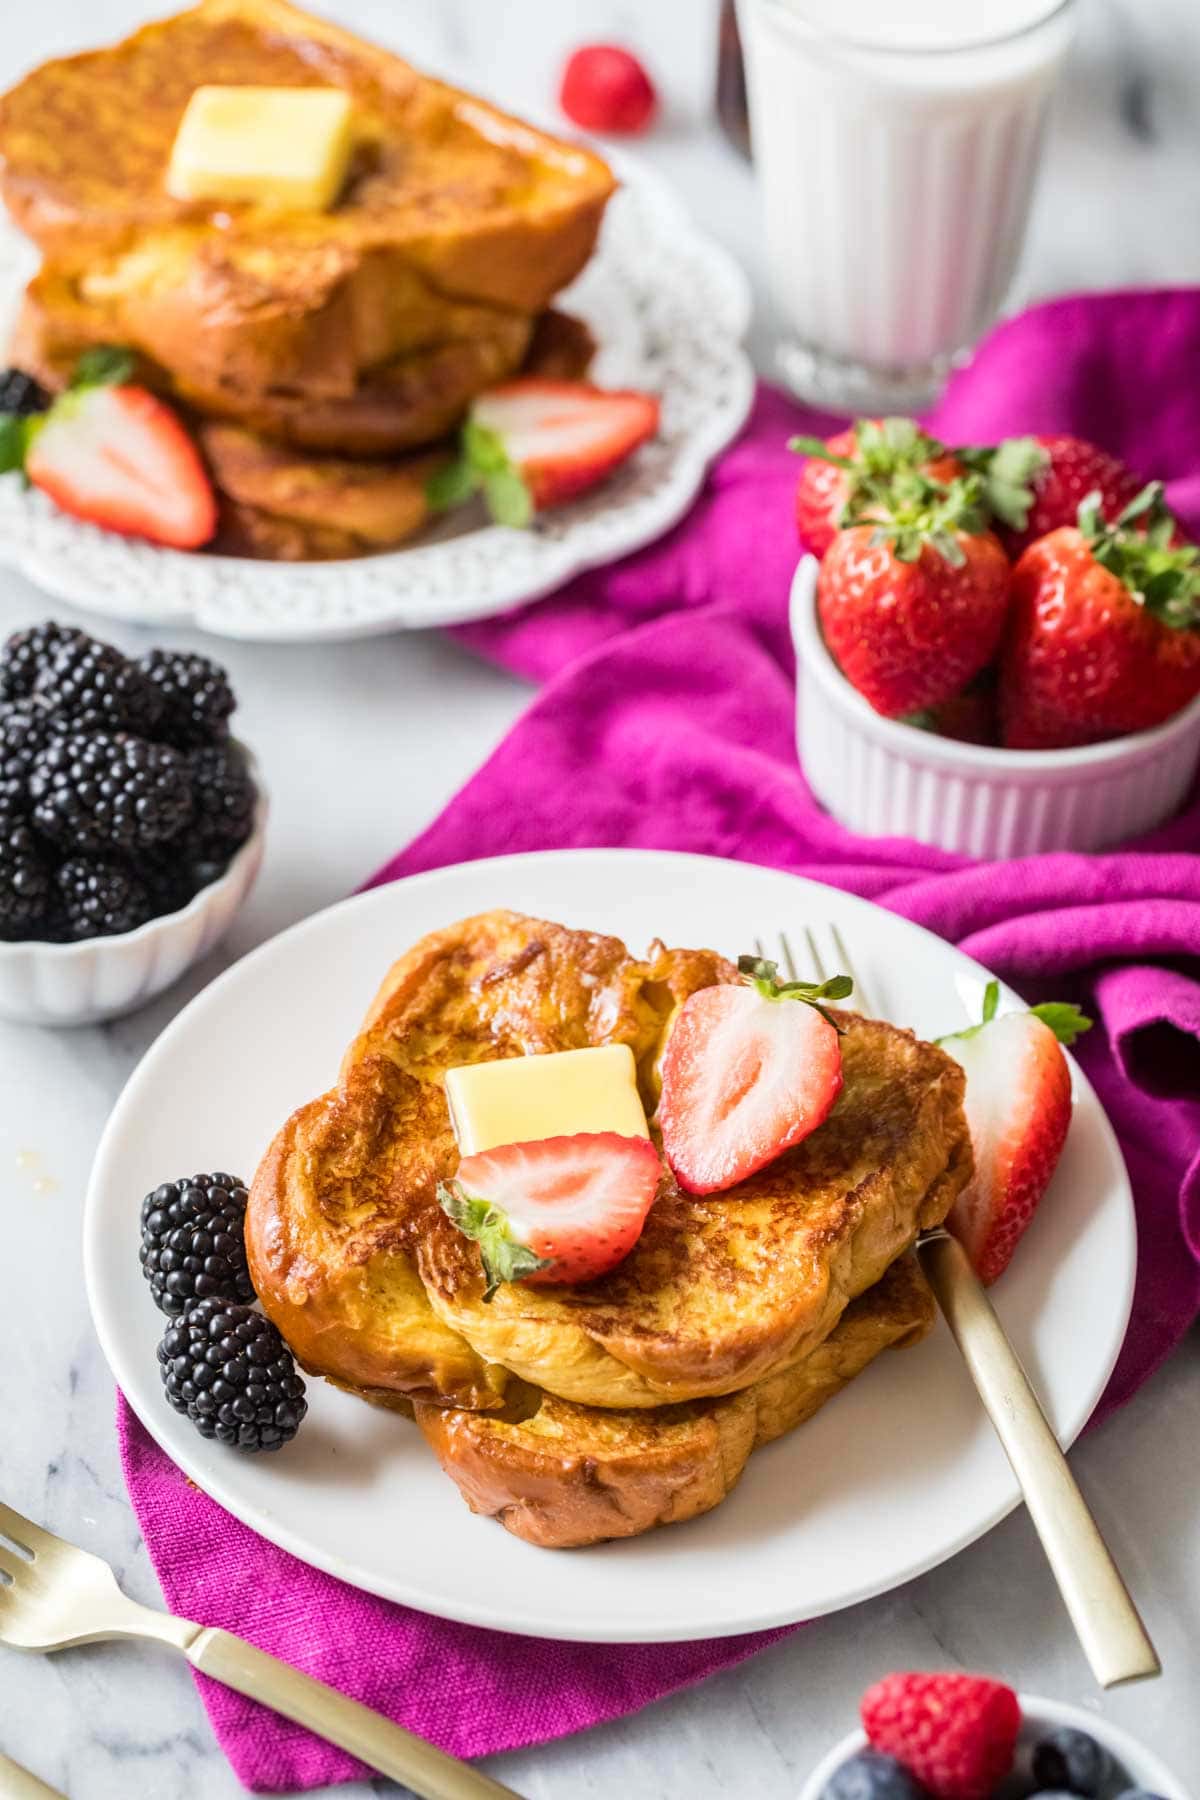 Stack of french toast made with brioche bread topped with a pat of butter and strawberry halves.